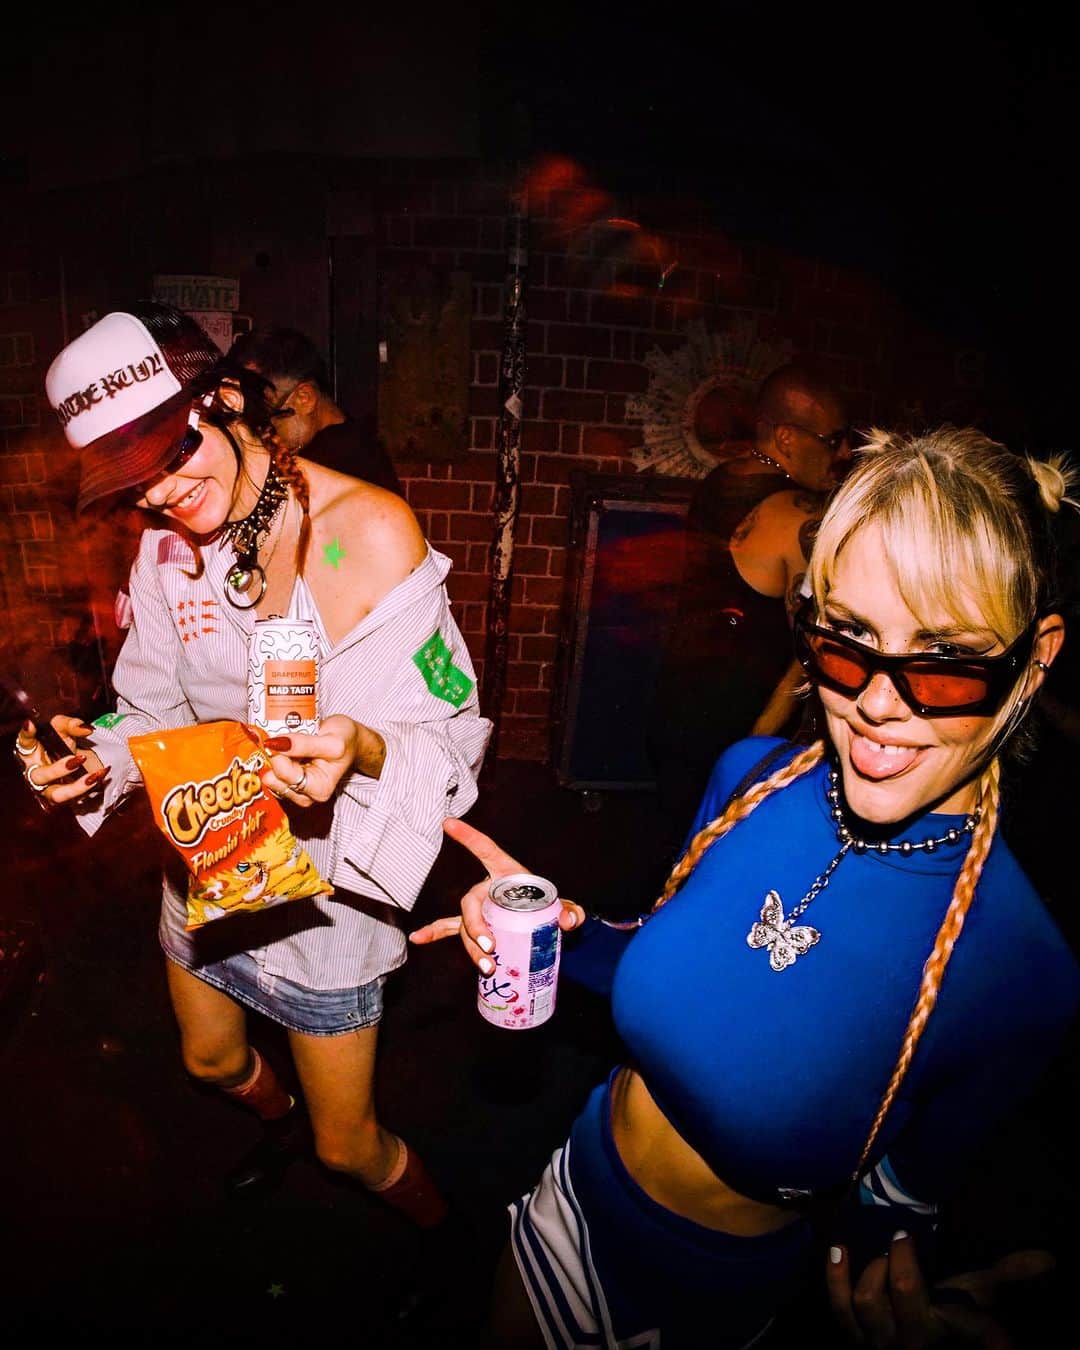 Ashley Smithのインスタグラム：「TRASHWORLD PRINCESSES ☠️ Swipe for the Halloween line up—->  Oct 28th - Trashworld DJ Debut at the end of the world apocalypse party ⚠️⚡️🤯 secret location downtown  Oct 29th - Goth Prom @losglobos presented by @deathproof.inc with loads of sick bands. Tix in @dm_trashworld Bio 🥀☠️ Photo by @dancefloormurder」